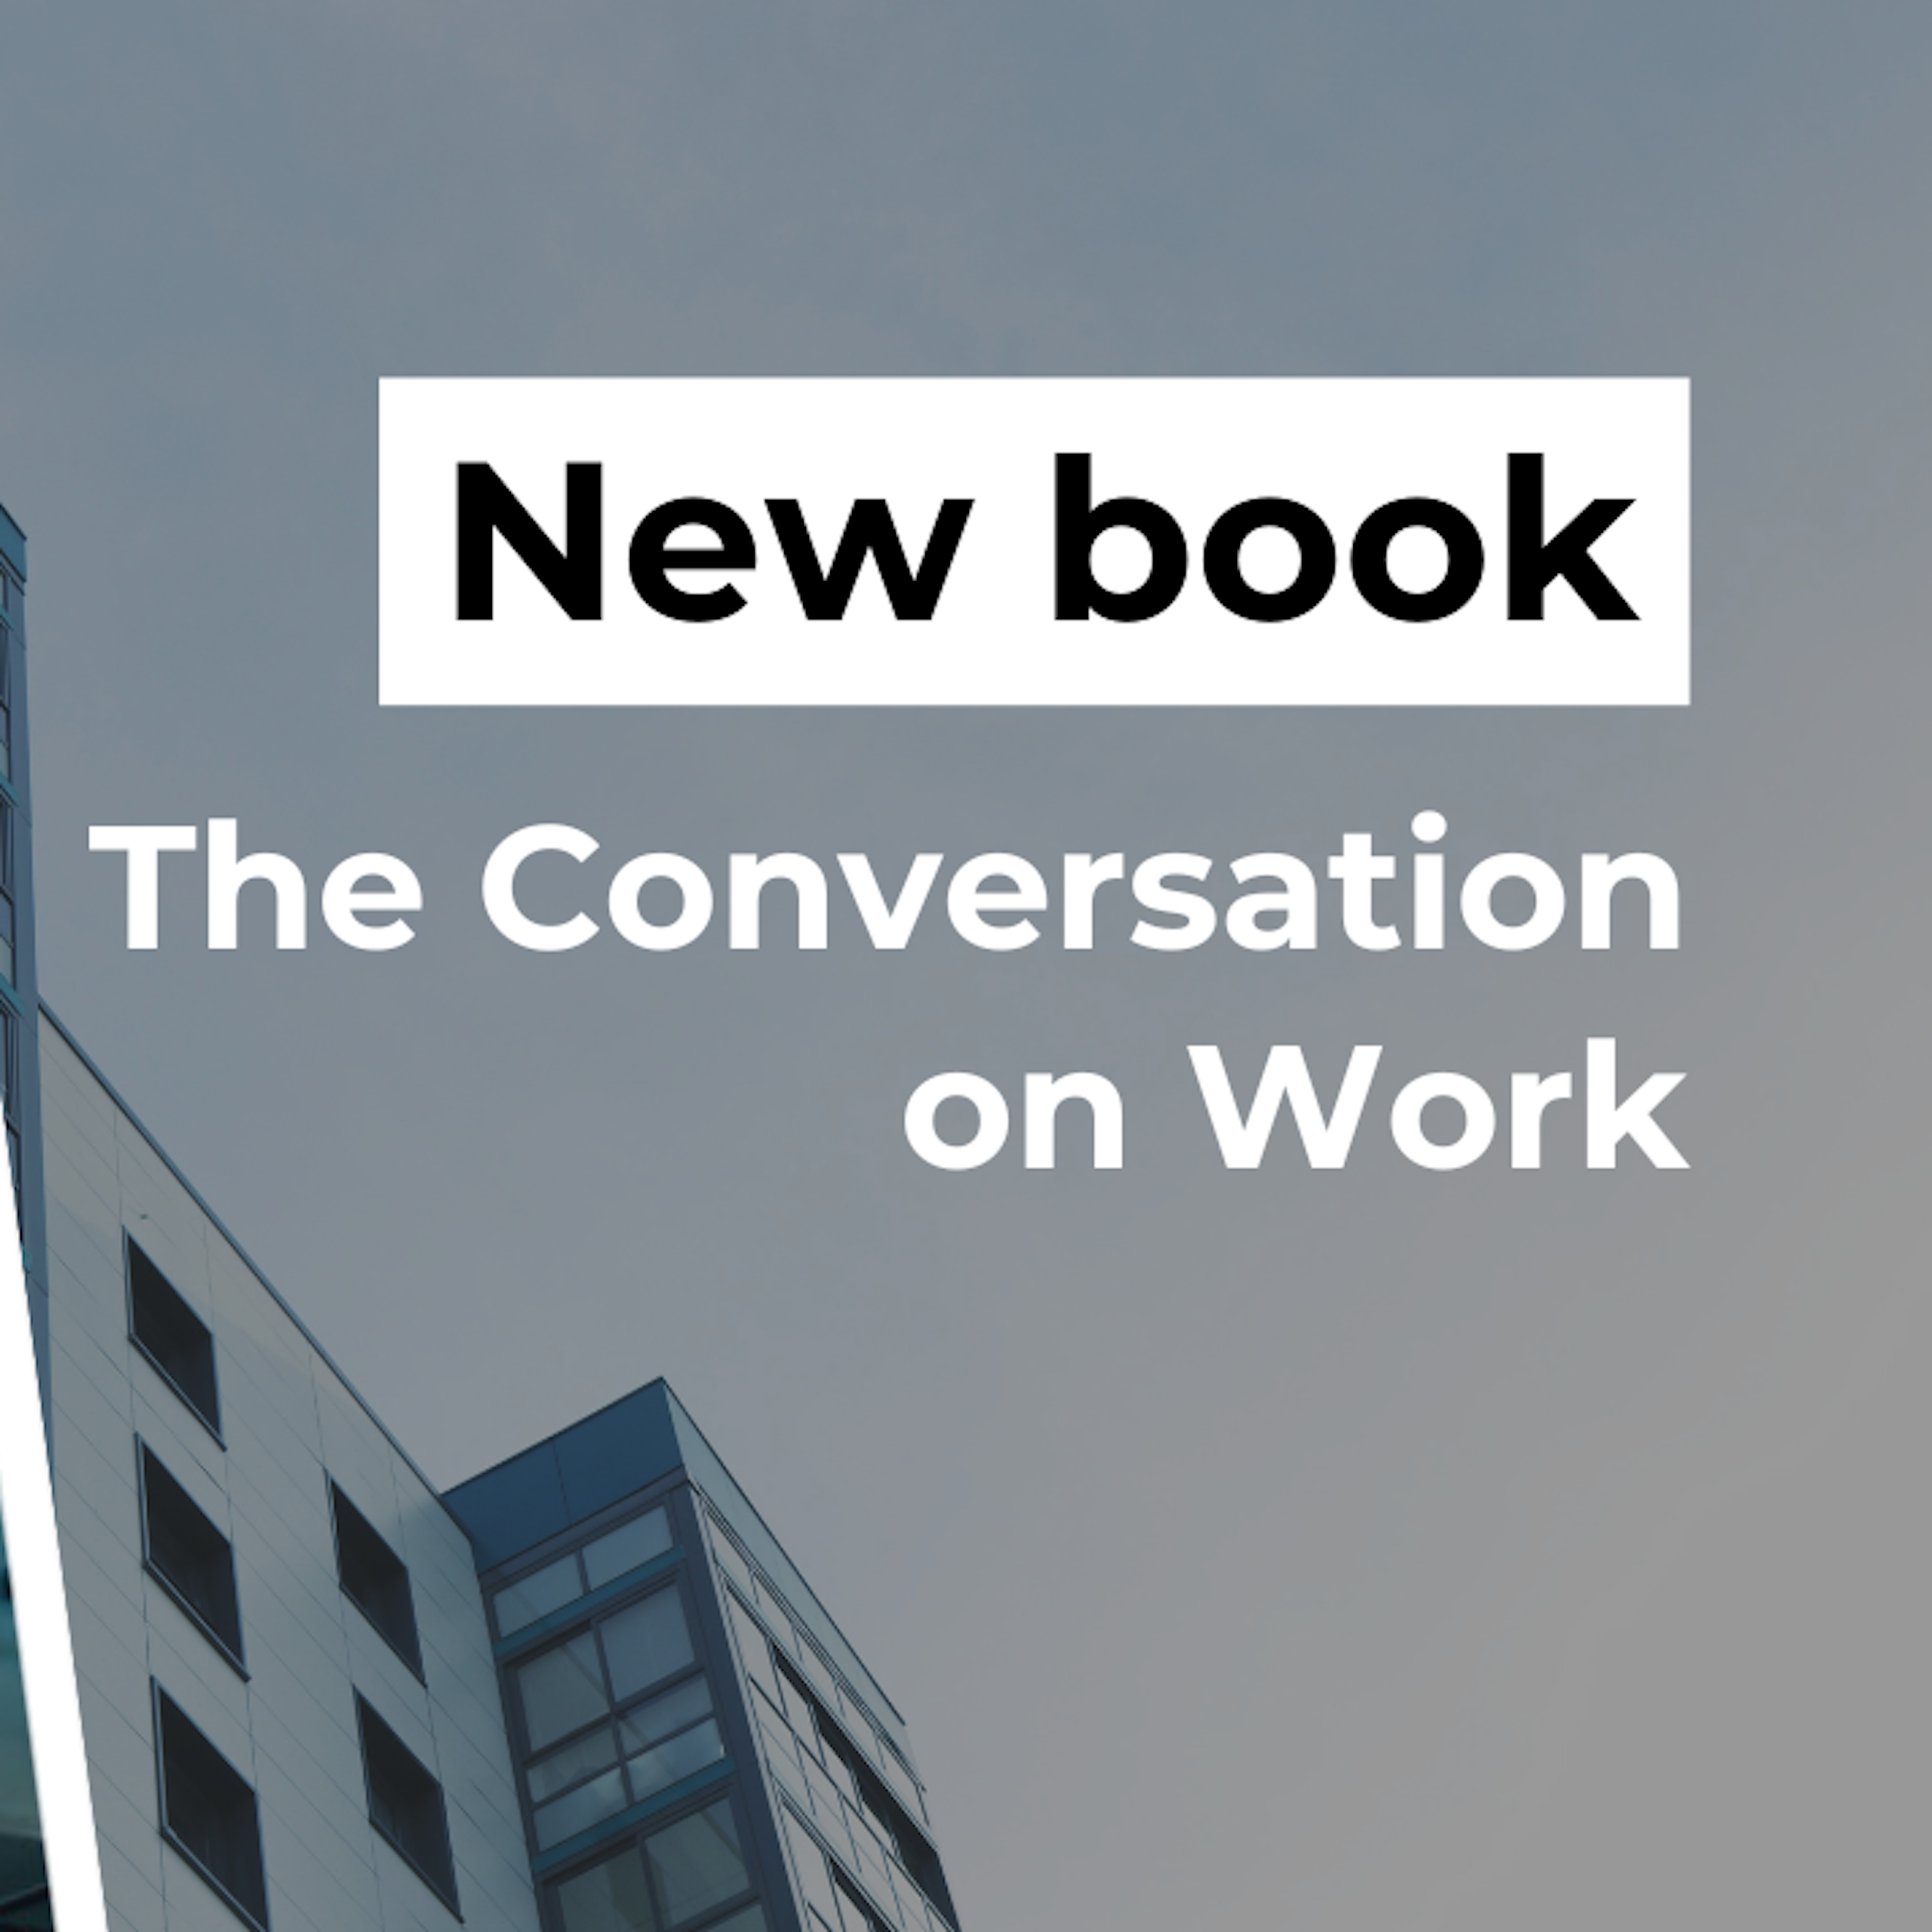 A graphic with a book cover and skyscraper reads "New book: The Conversation on Work. Preorder today"